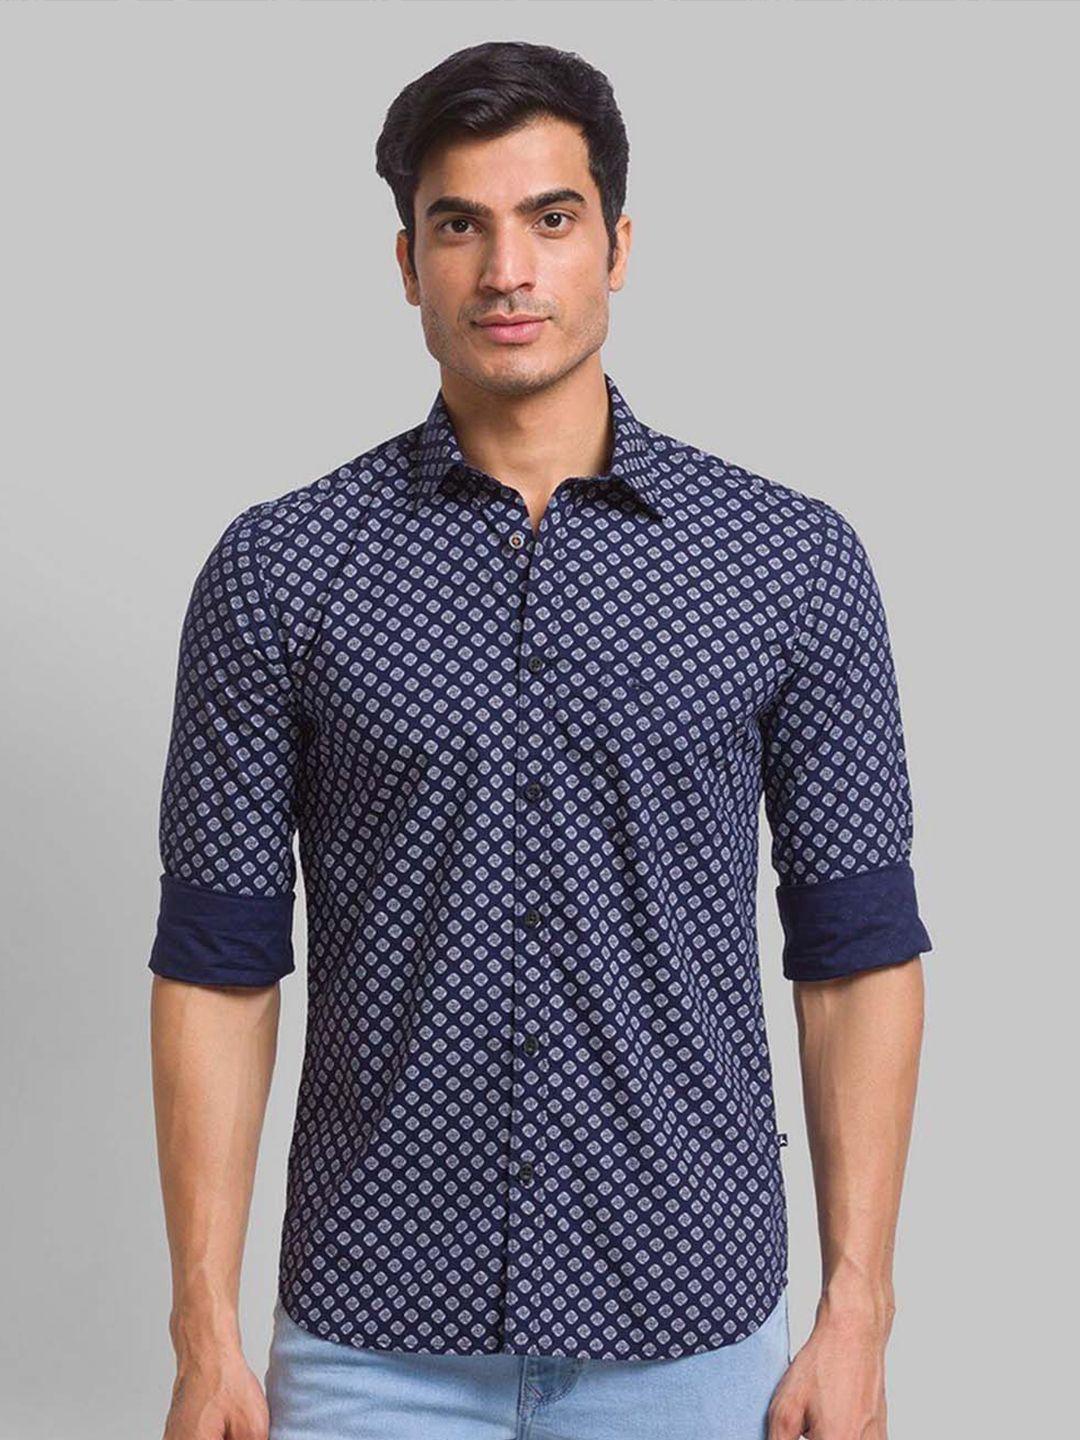 parx-men-black-pure-cotton-printed-roll-up-sleeves-spread-collar-casual-shirt